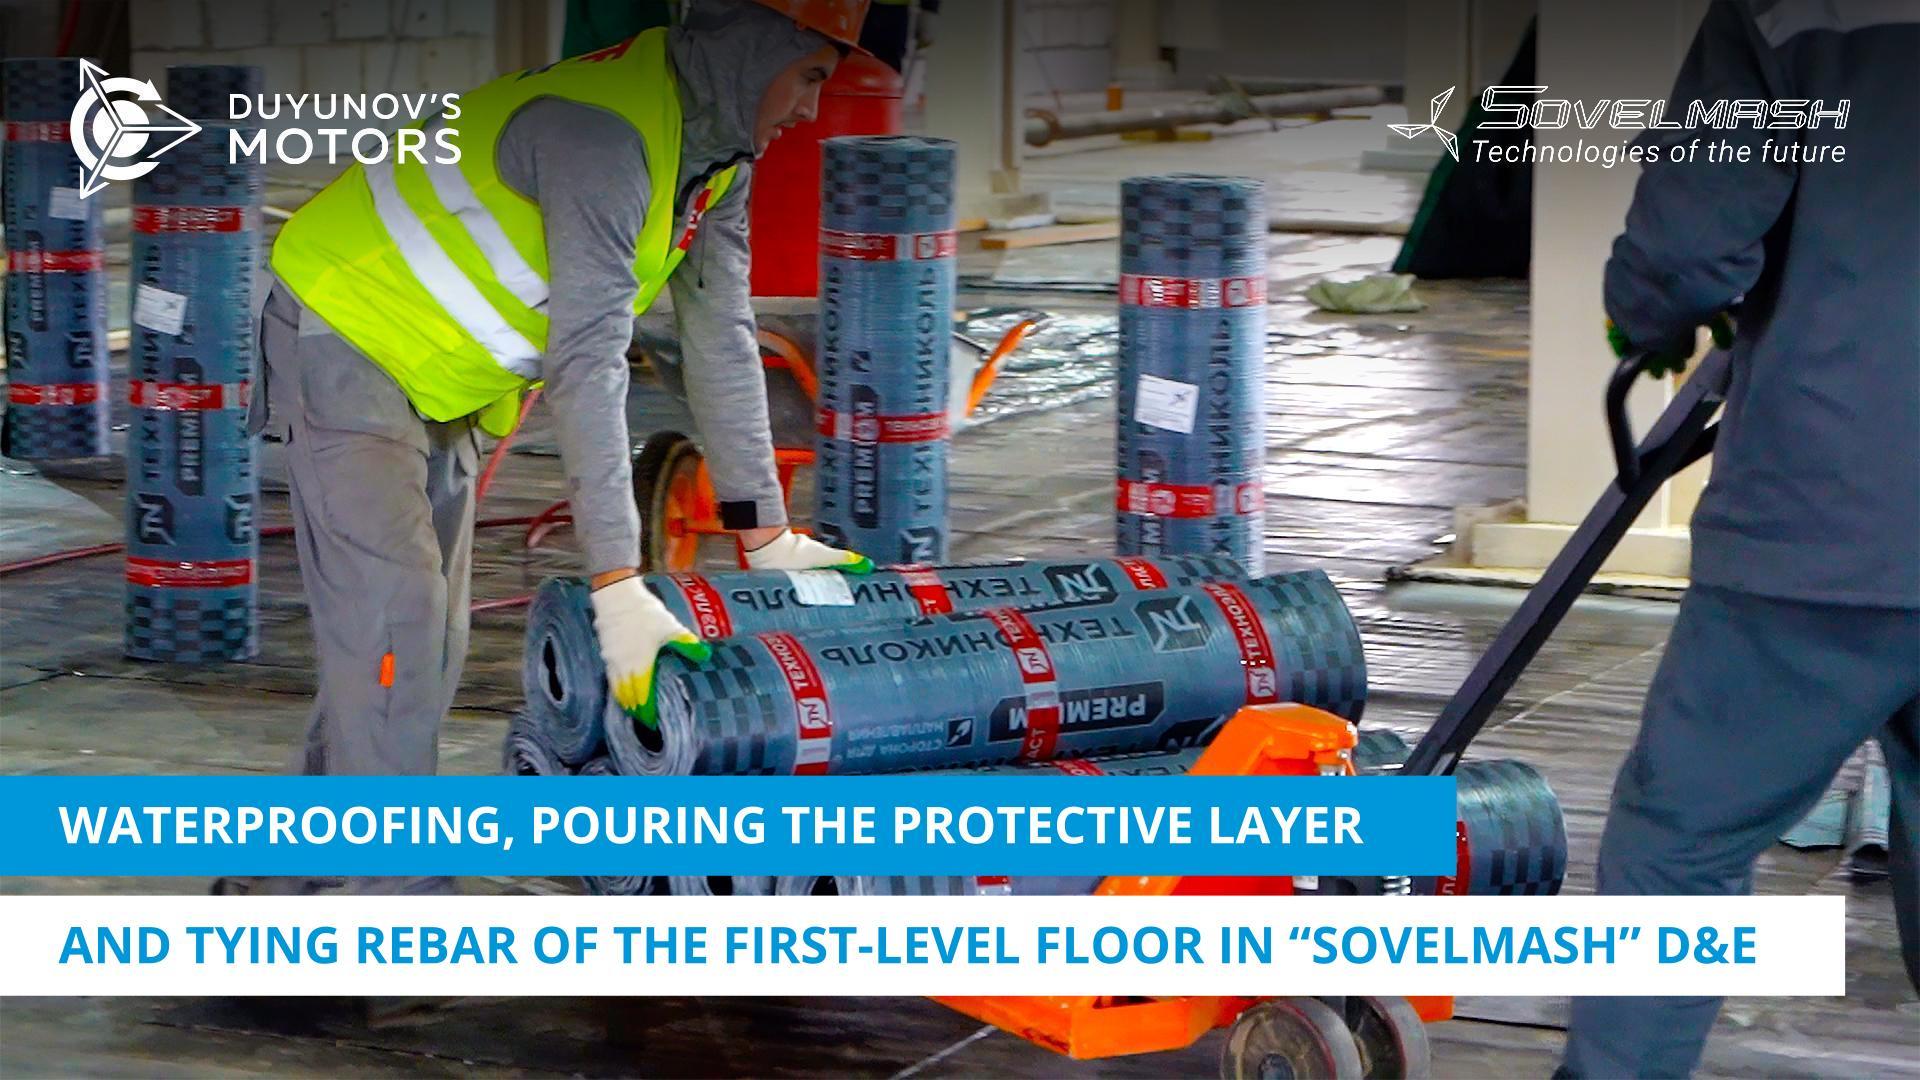 Waterproofing, pouring the protective layer and tying the rebar of the first-level floor in the "Sovelmash" D&E